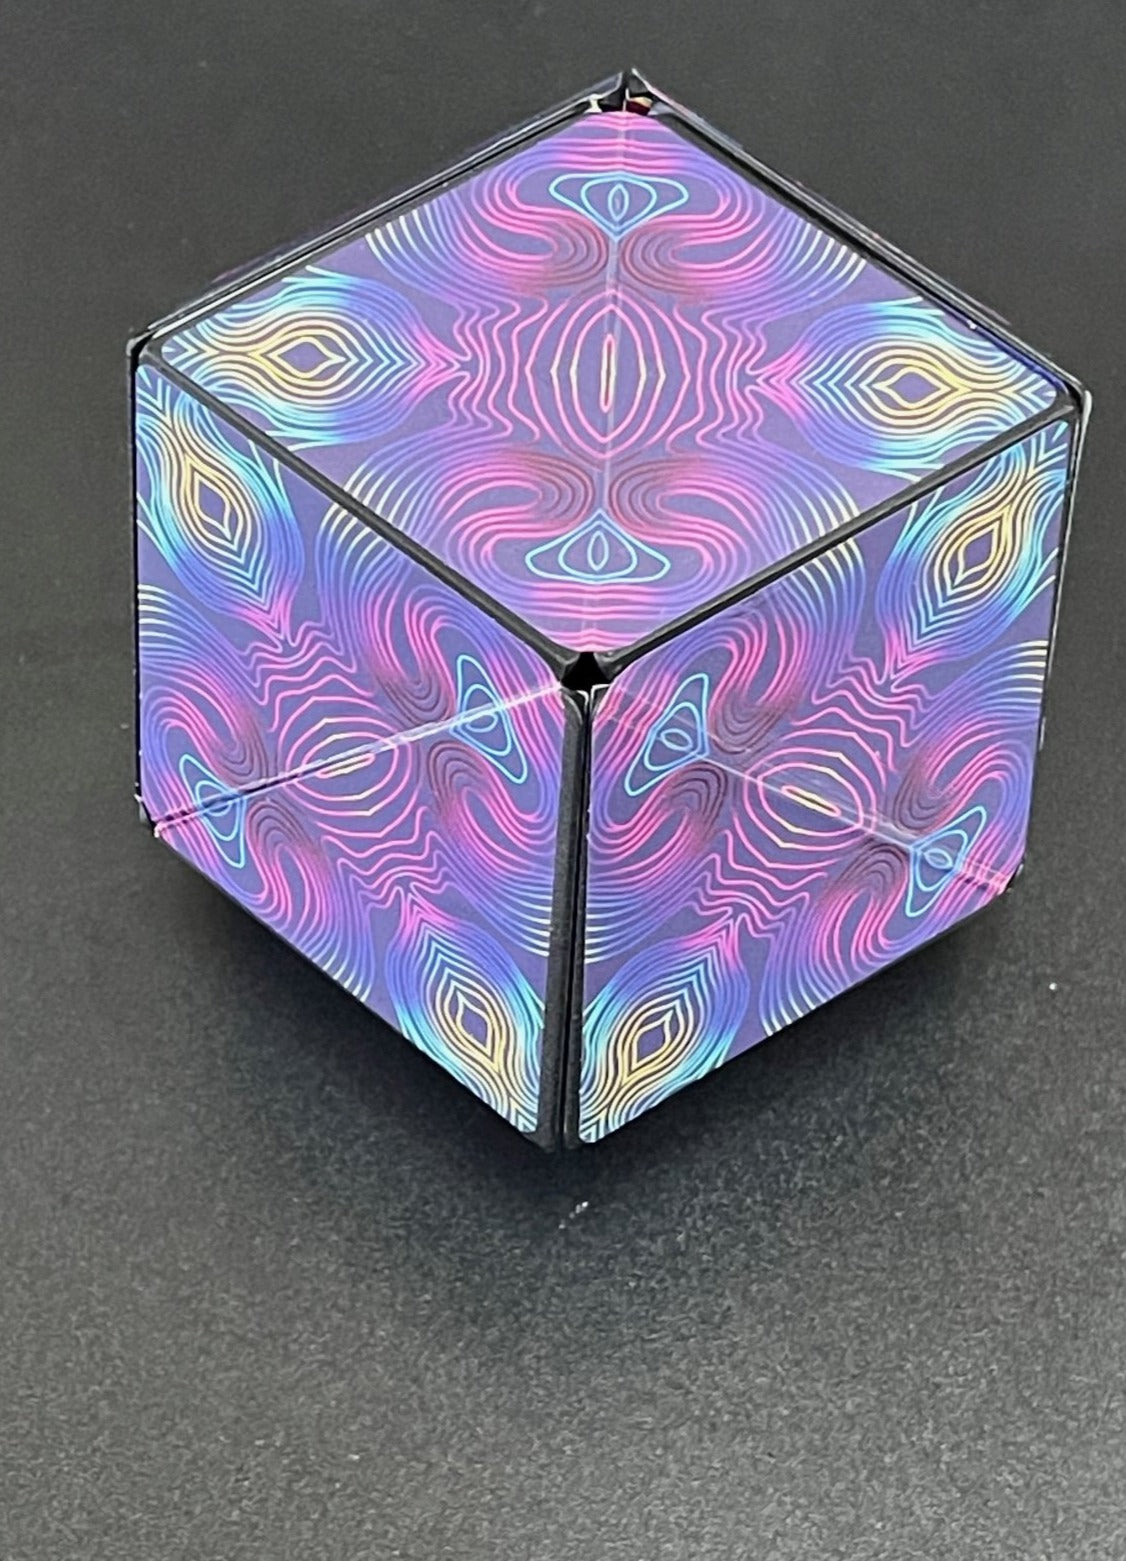 Conundrum House - Kaleidoscope pattern inside out. One of the over 70 shapes that the Unfolding Magnetic Magic Cube can be shaped into.